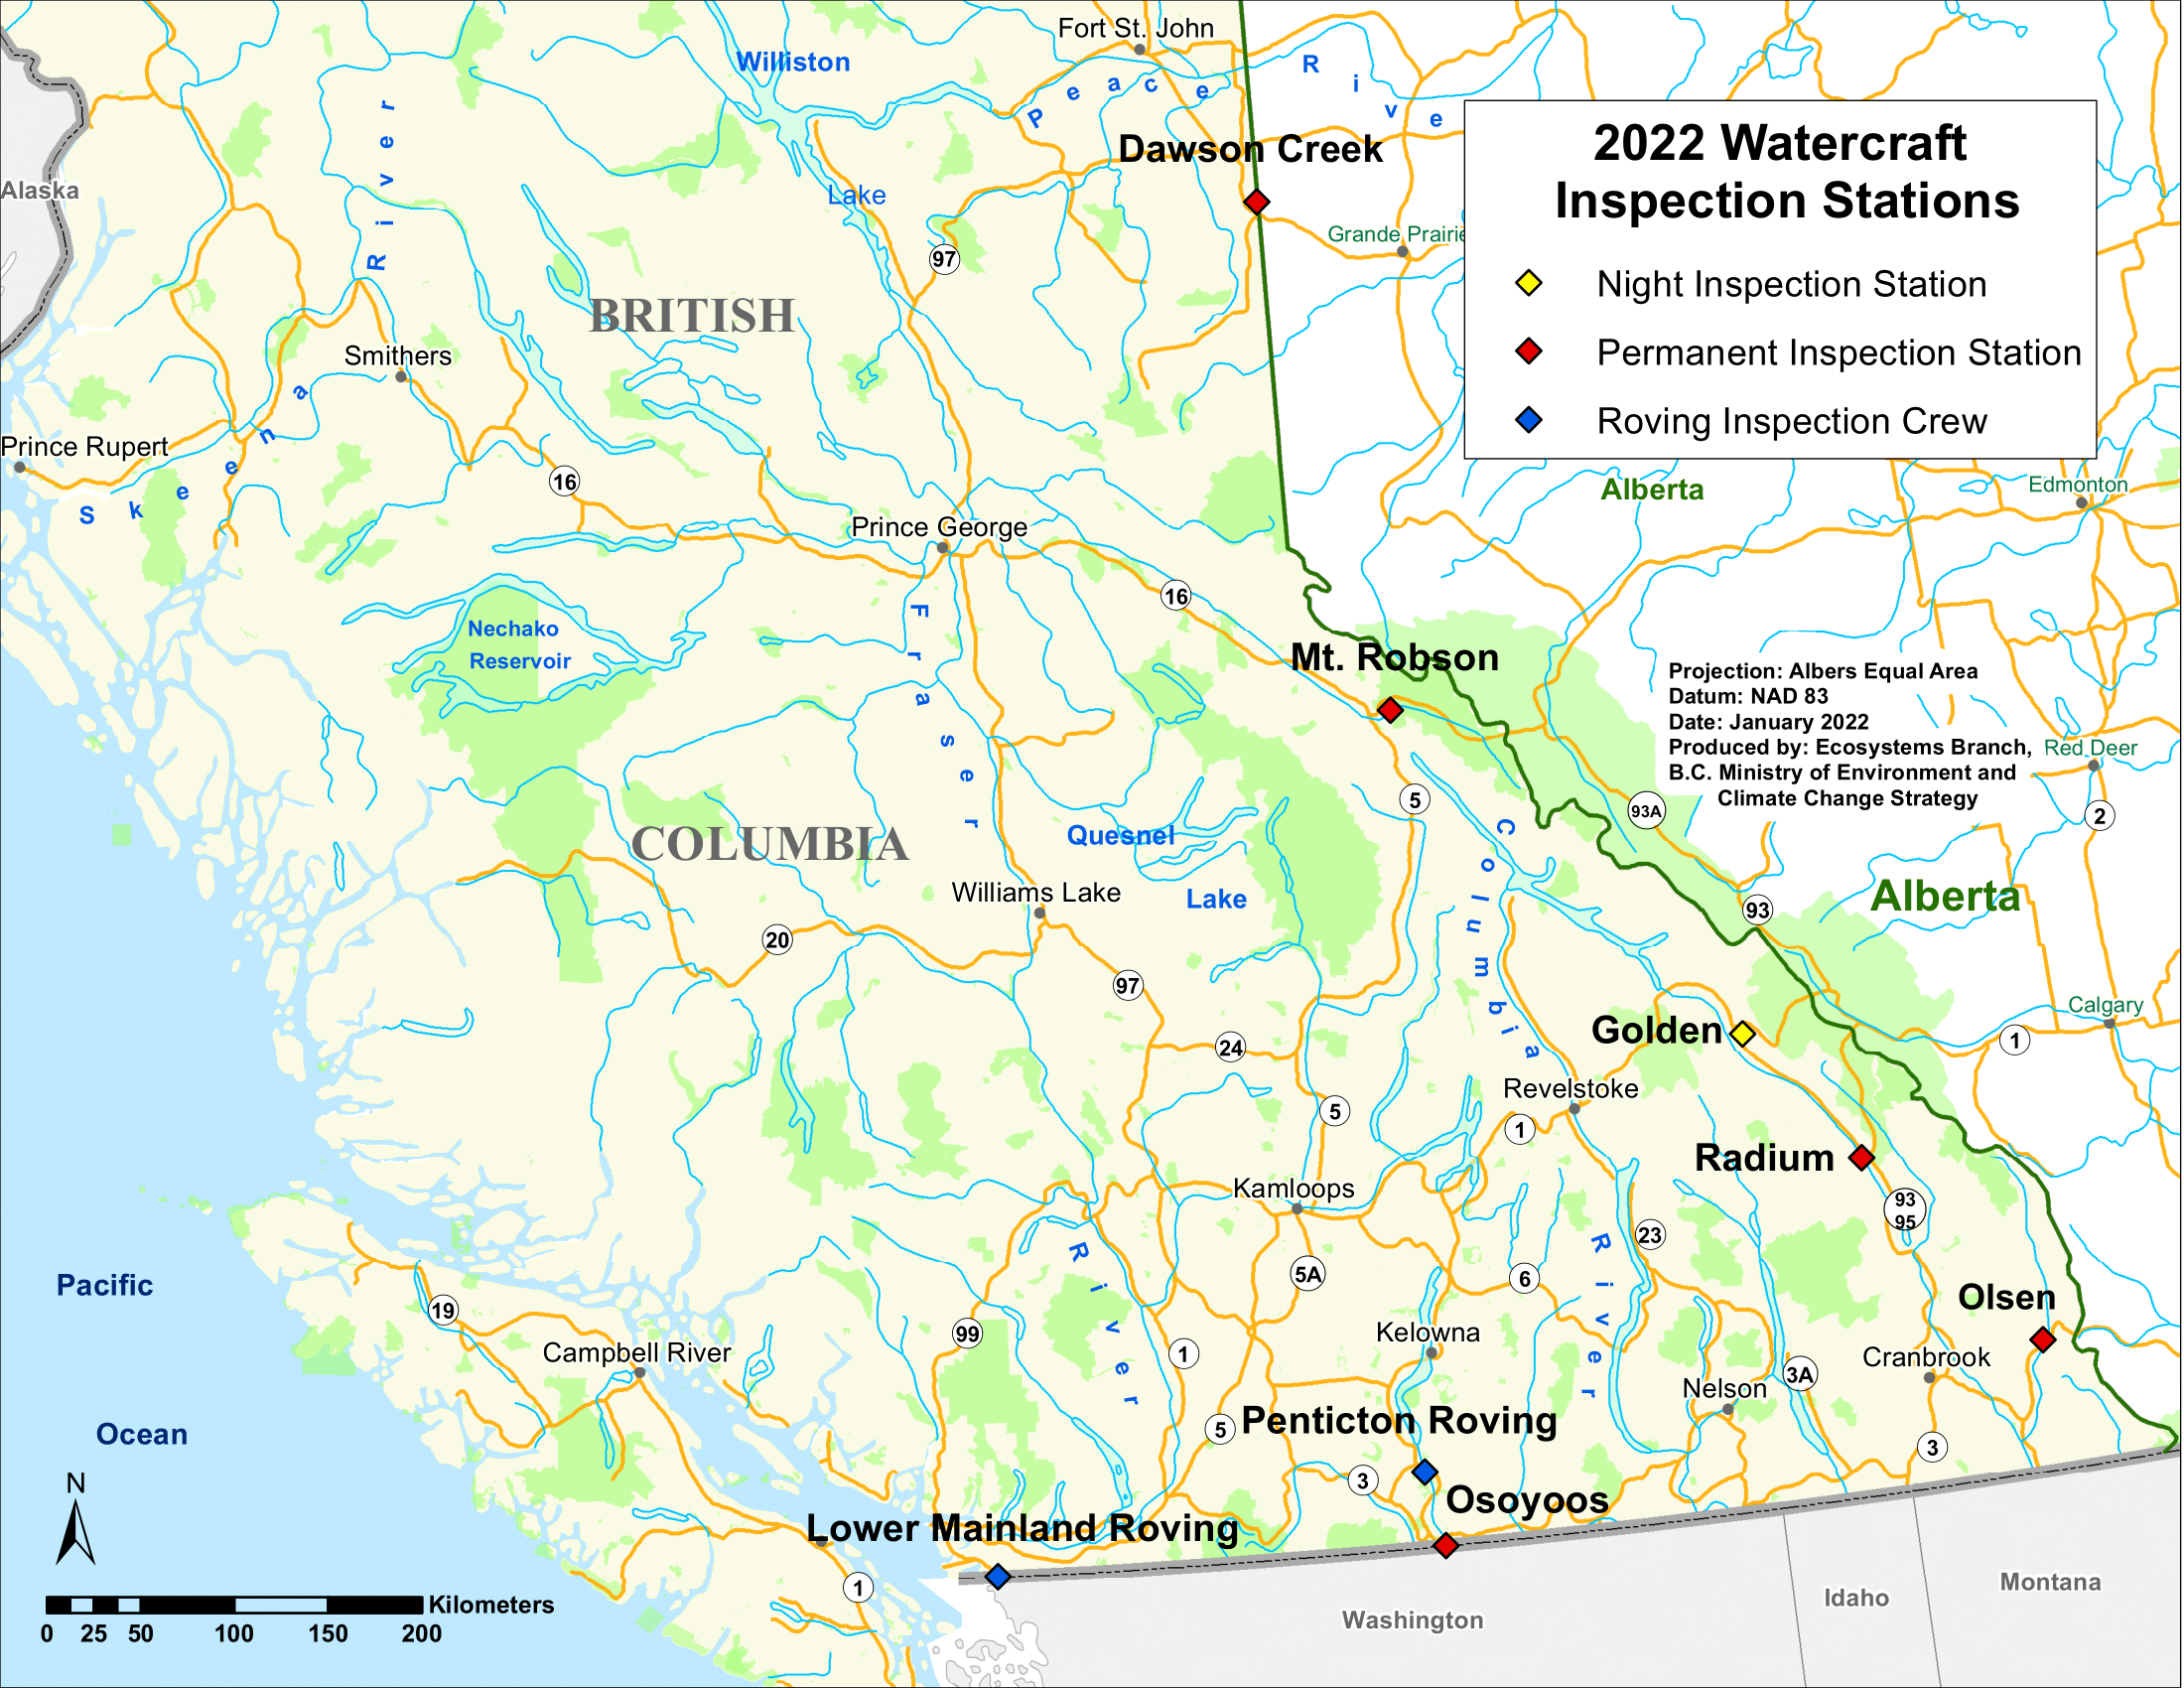 Map showing location and operation hours of inspection stations across the province